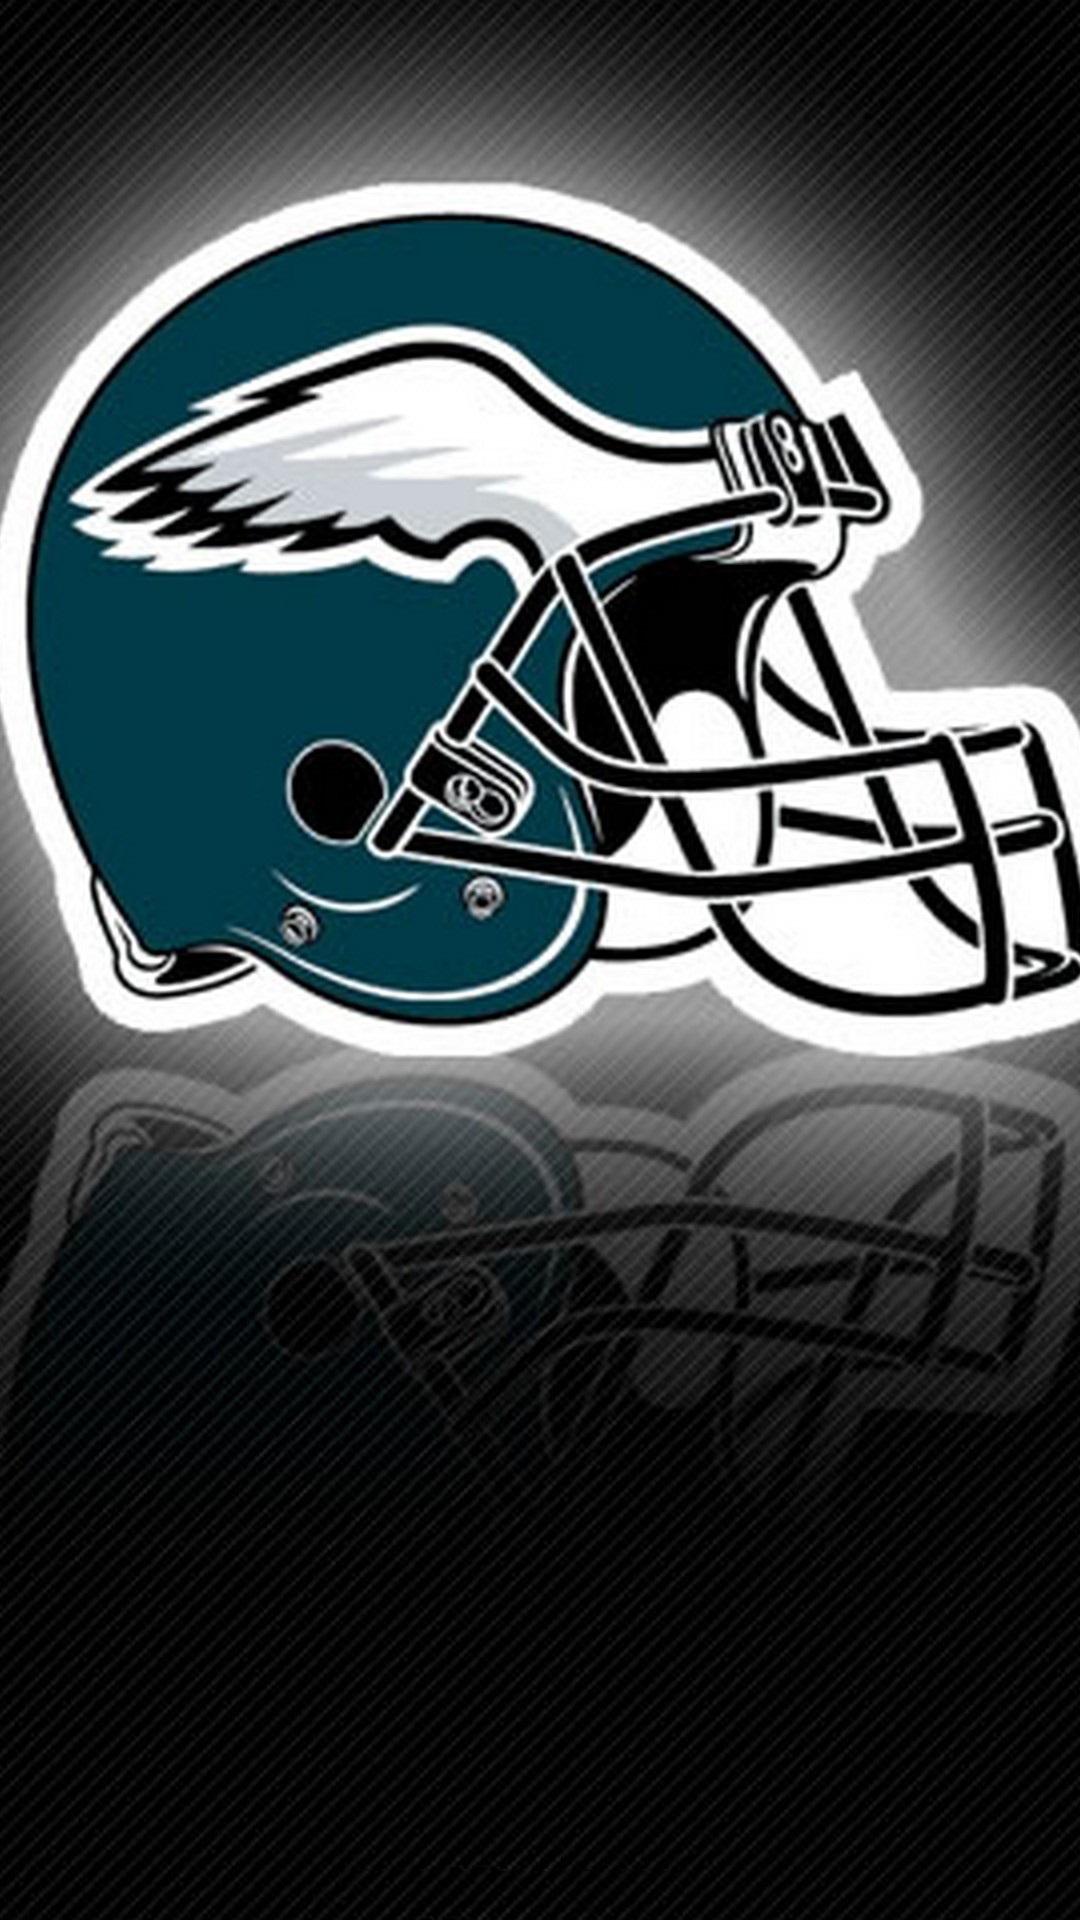 iPhone Wallpaper HD NFL Eagles With Resolution 1080X1920 pixel. You can make this wallpaper for your Mac or Windows Desktop Background, iPhone, Android or Tablet and another Smartphone device for free